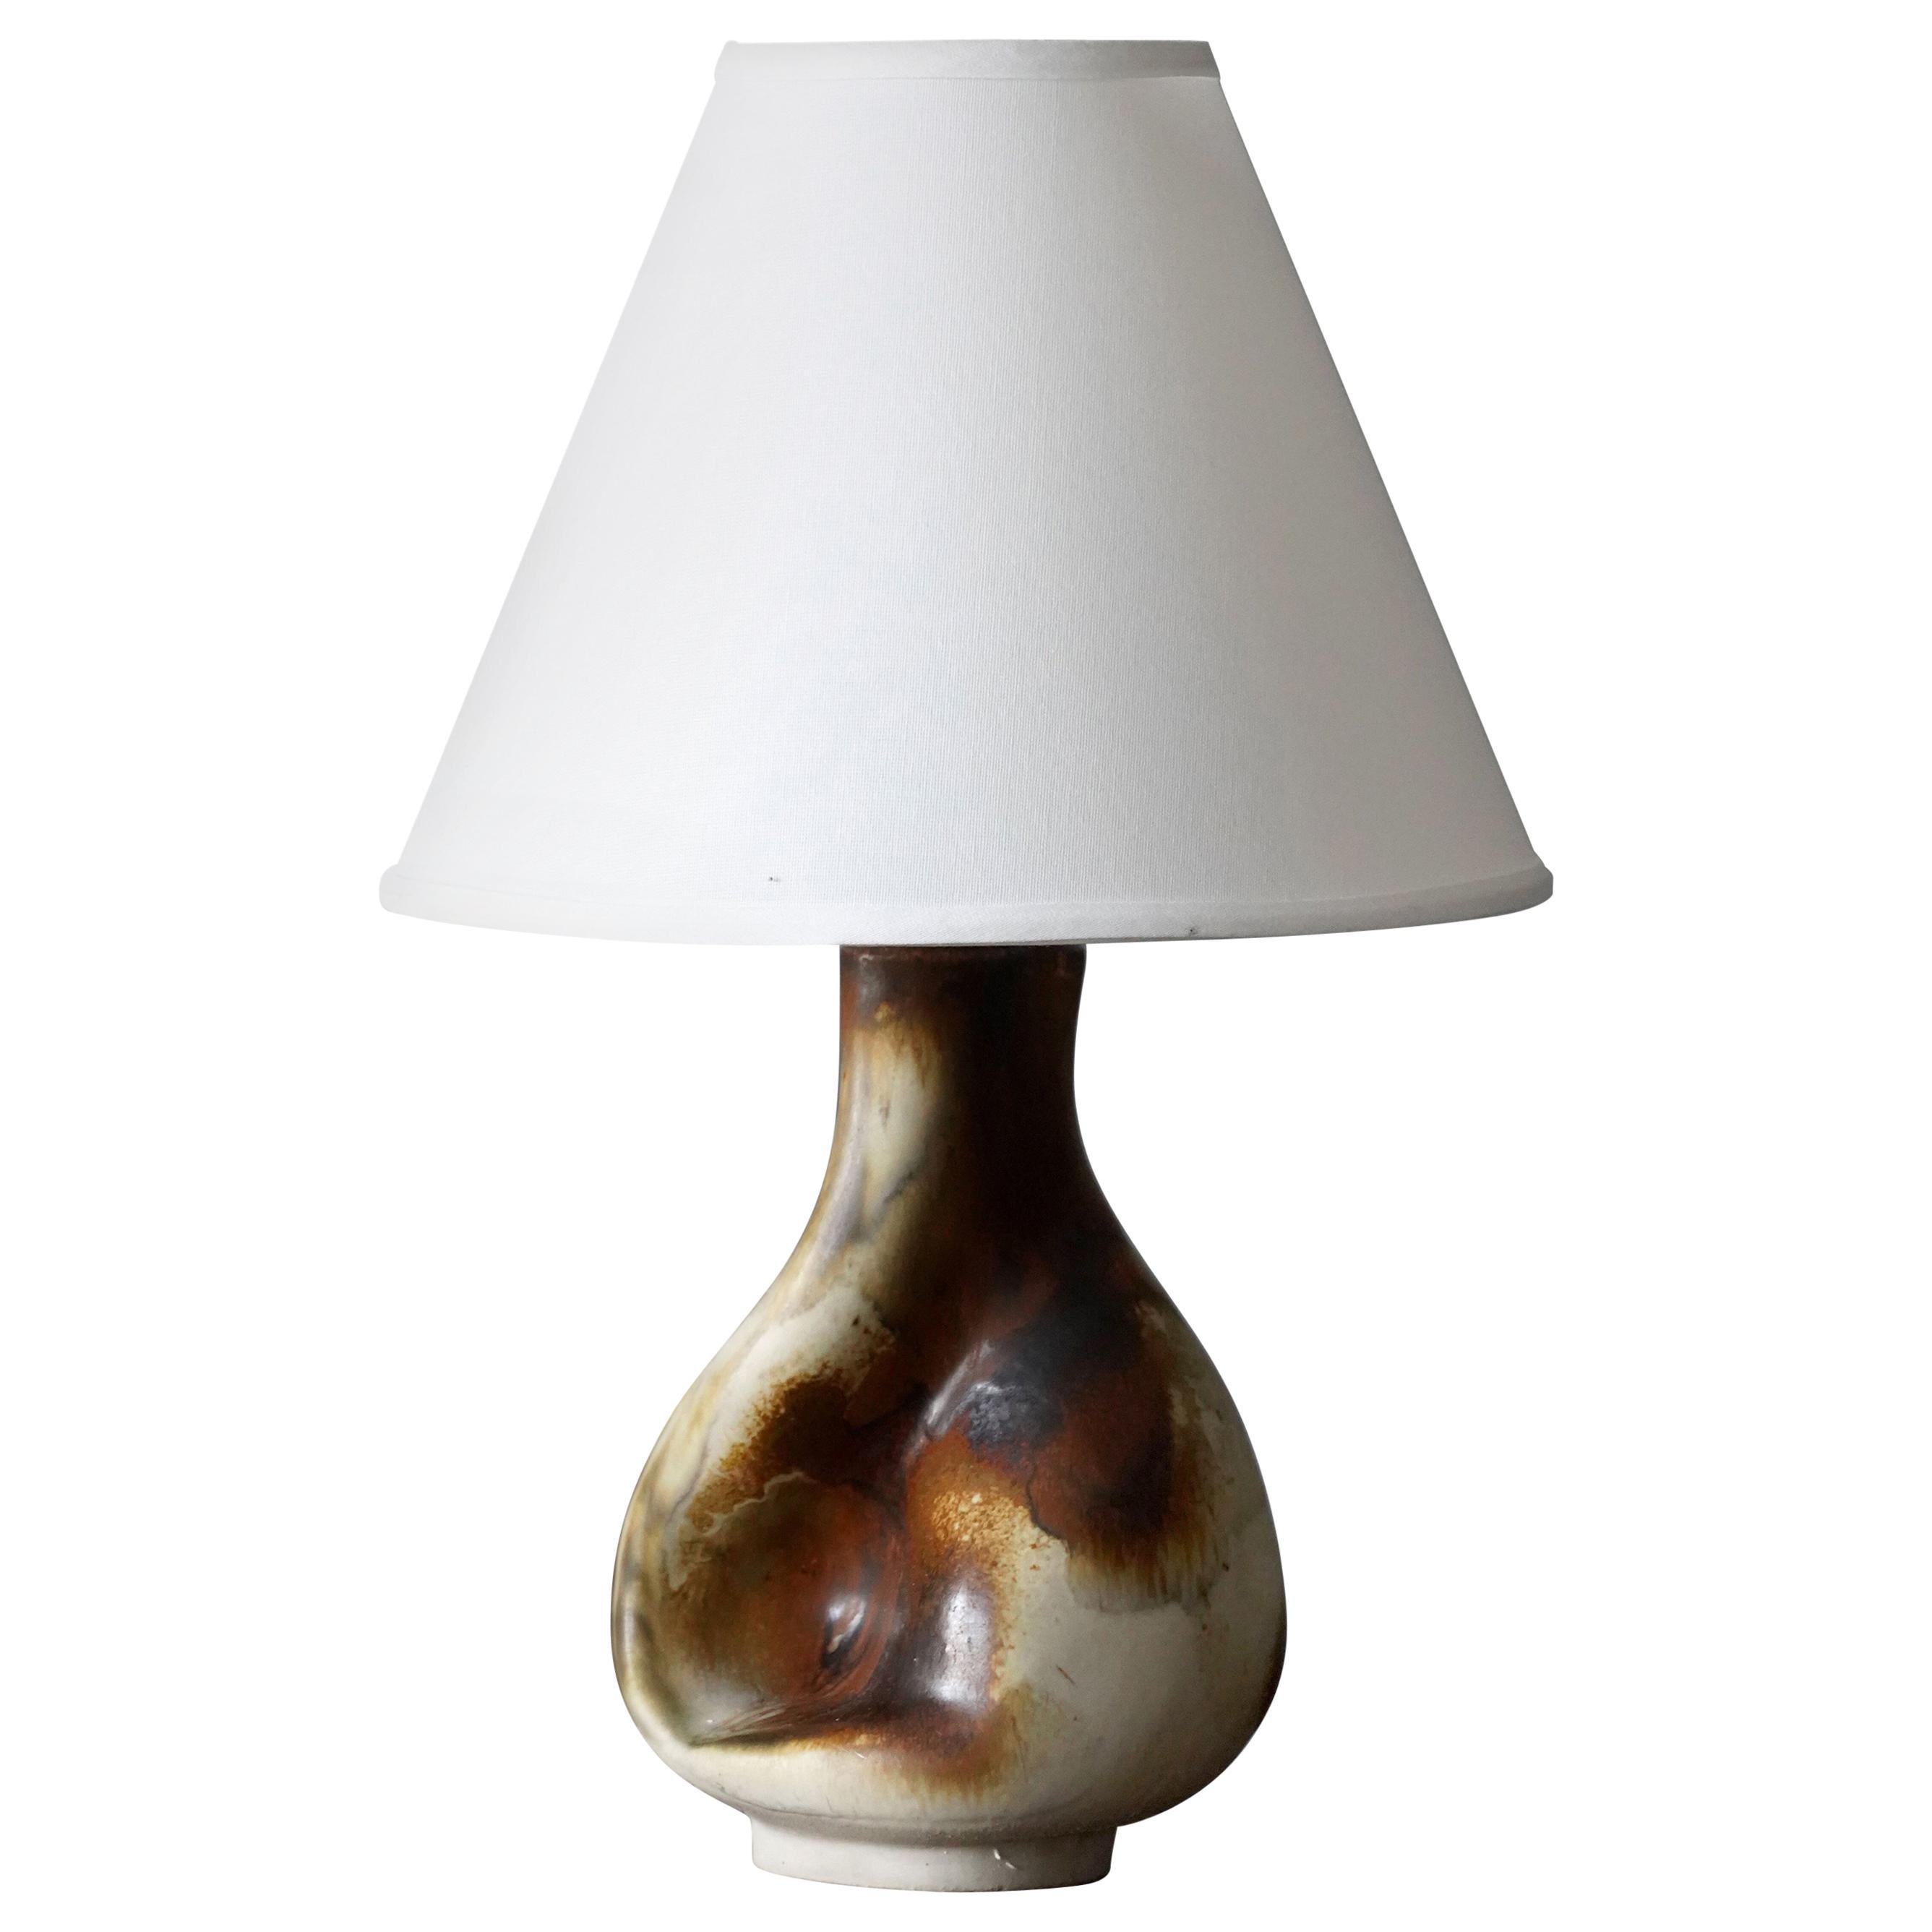 Axella, Organic Table Lamp, Glazed and Painted Stoneware, Denmark, 1960s